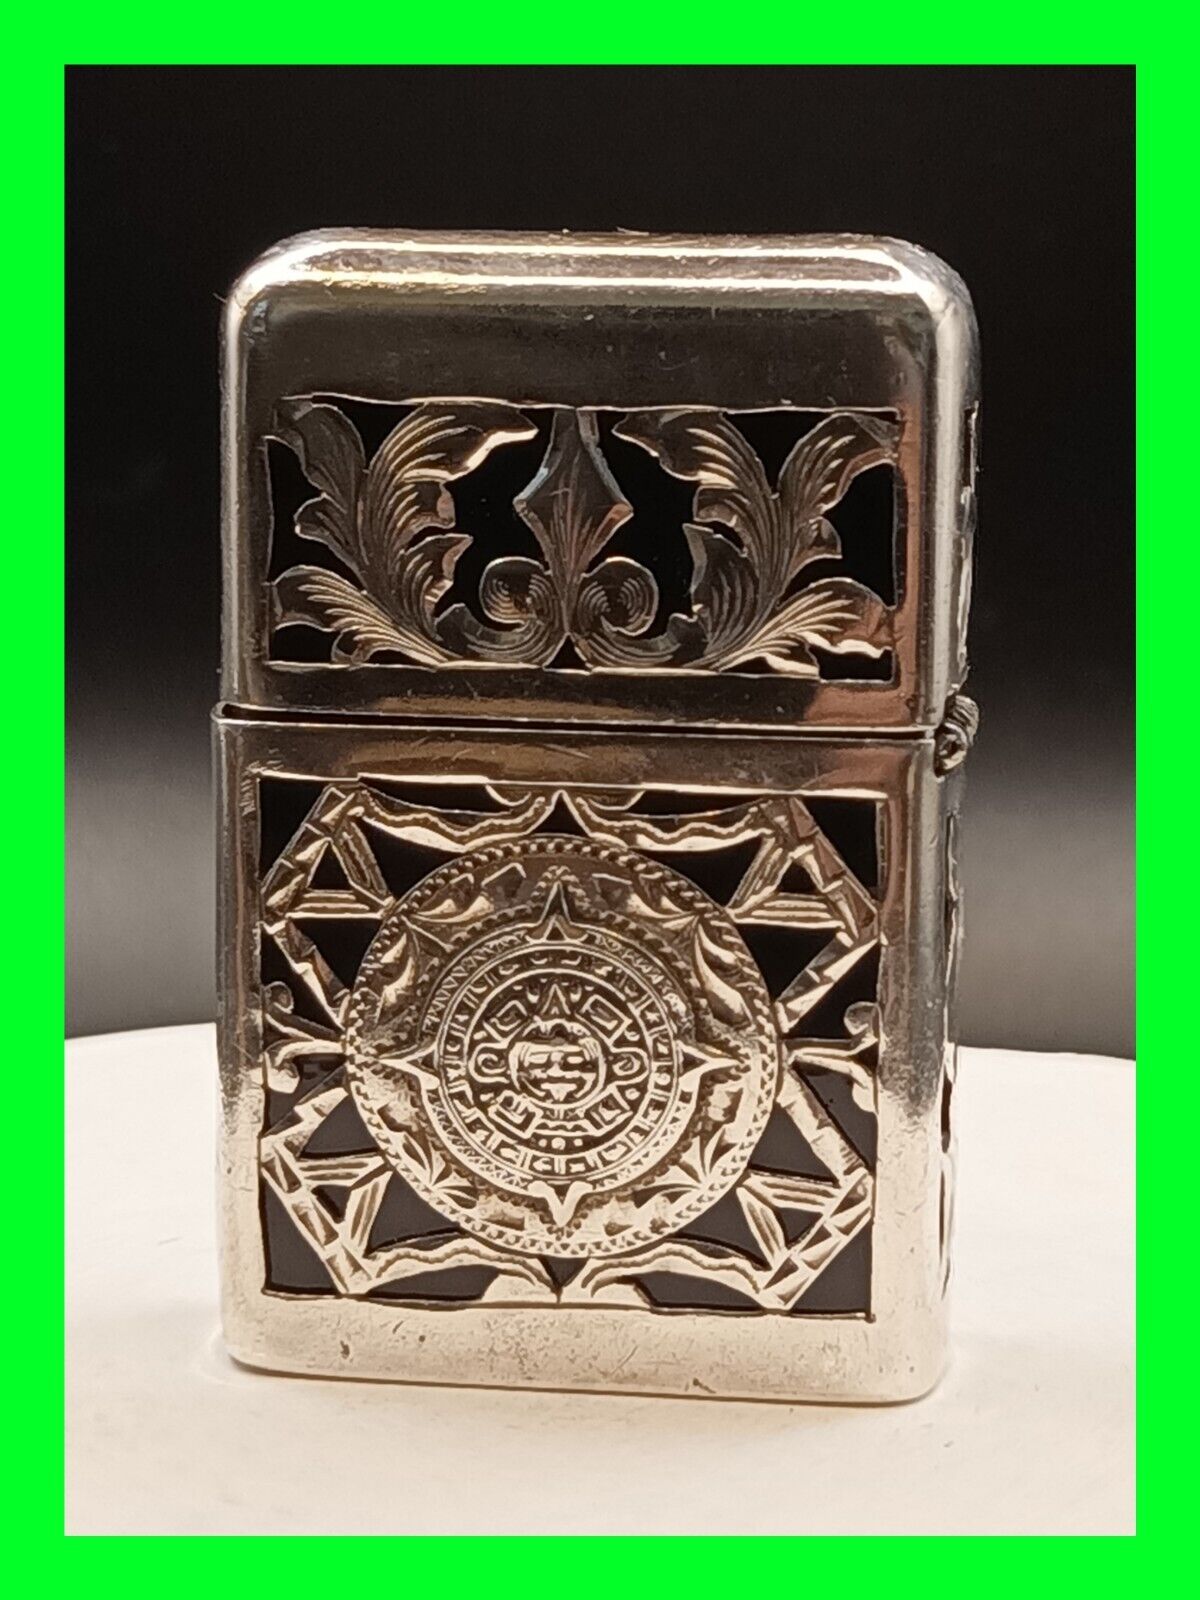 Early Vintage .925 Mayan Sterling Silver Case w/ Zippo Lighter & 2517191 Insert 